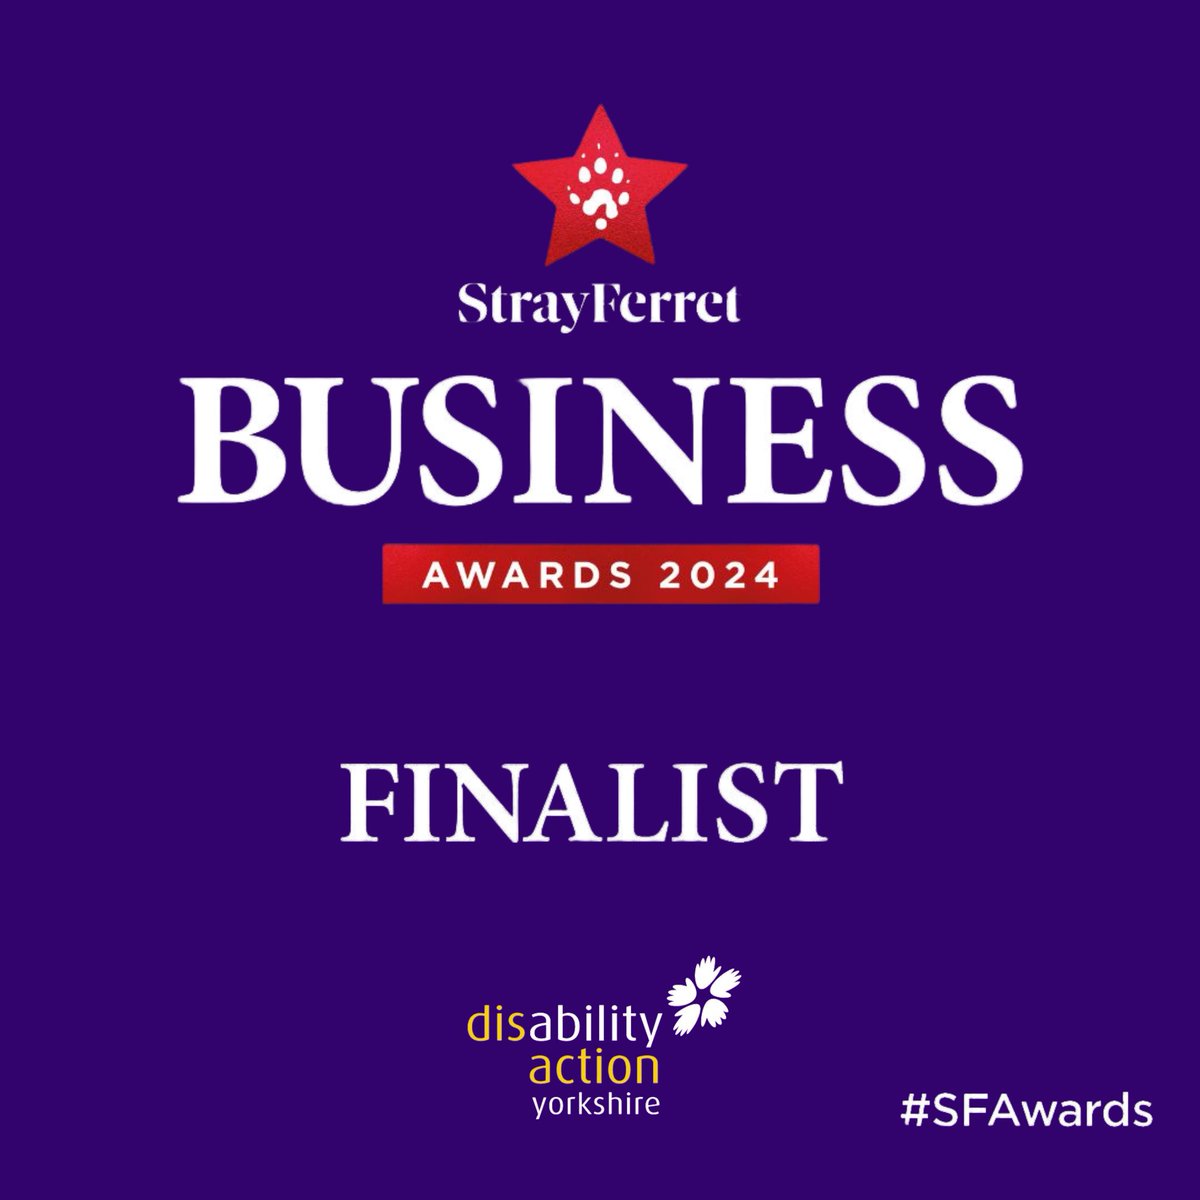 It's finally here! 2024's The Stray Ferret Business Awards are upon us! We're beyond excited to be finalists for the Inclusivity Award. Wish us luck tonight! #DisabilityActionYorkshire #DAY #StrayFerretBusinessAwards #Finalists #Inclusivity